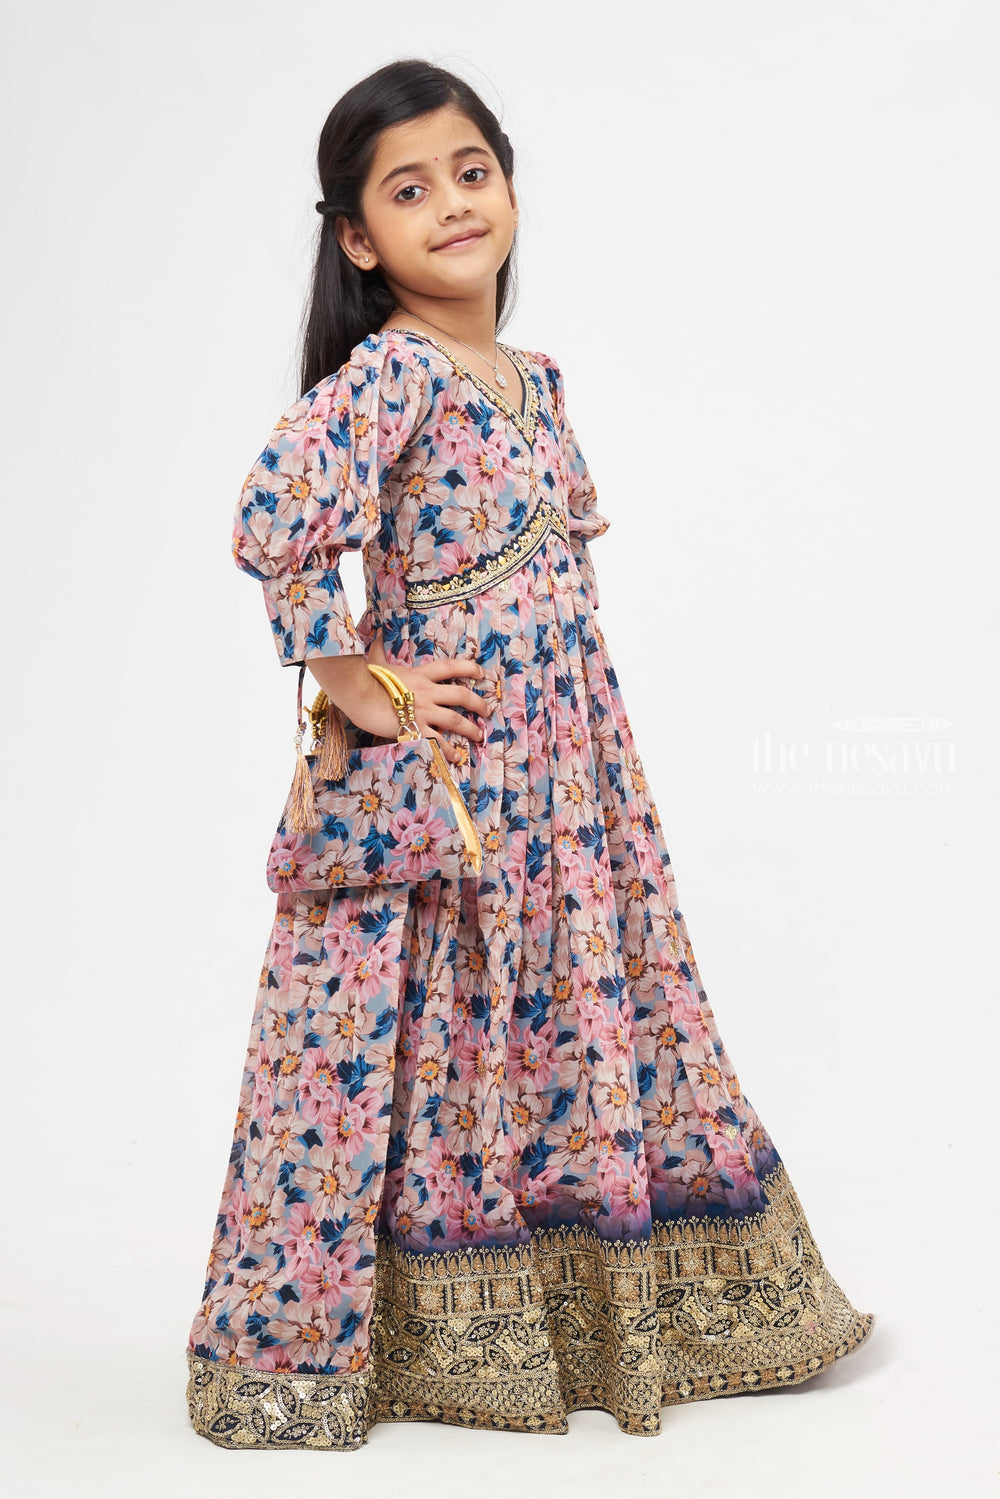 The Nesavu Girls Party Gown Ethereal Floral Diwali Anarkali Gown with Exquisite Sequin Embellishments for Girls Nesavu Pastel Floral Designer Anarkali Gown | Diwali Special Girls Festive Collection | The Nesavu